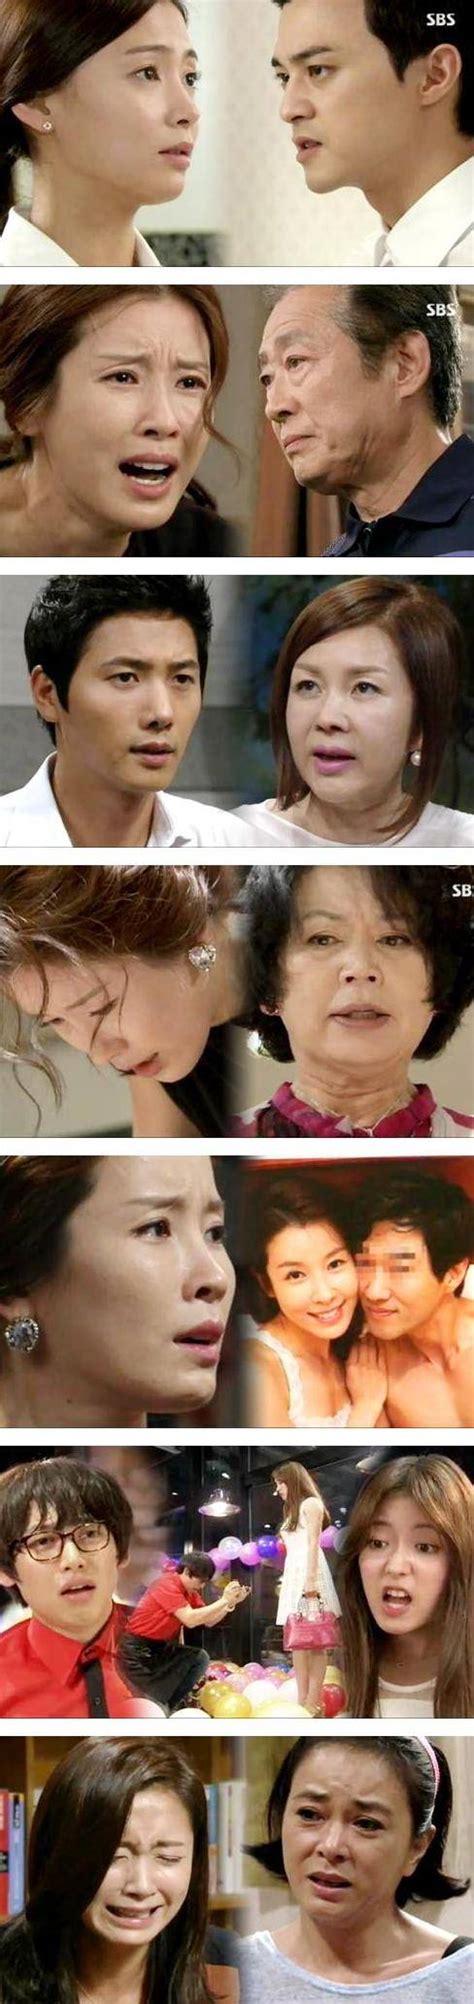 [spoiler] added episodes 23 and 24 captures for the korean drama